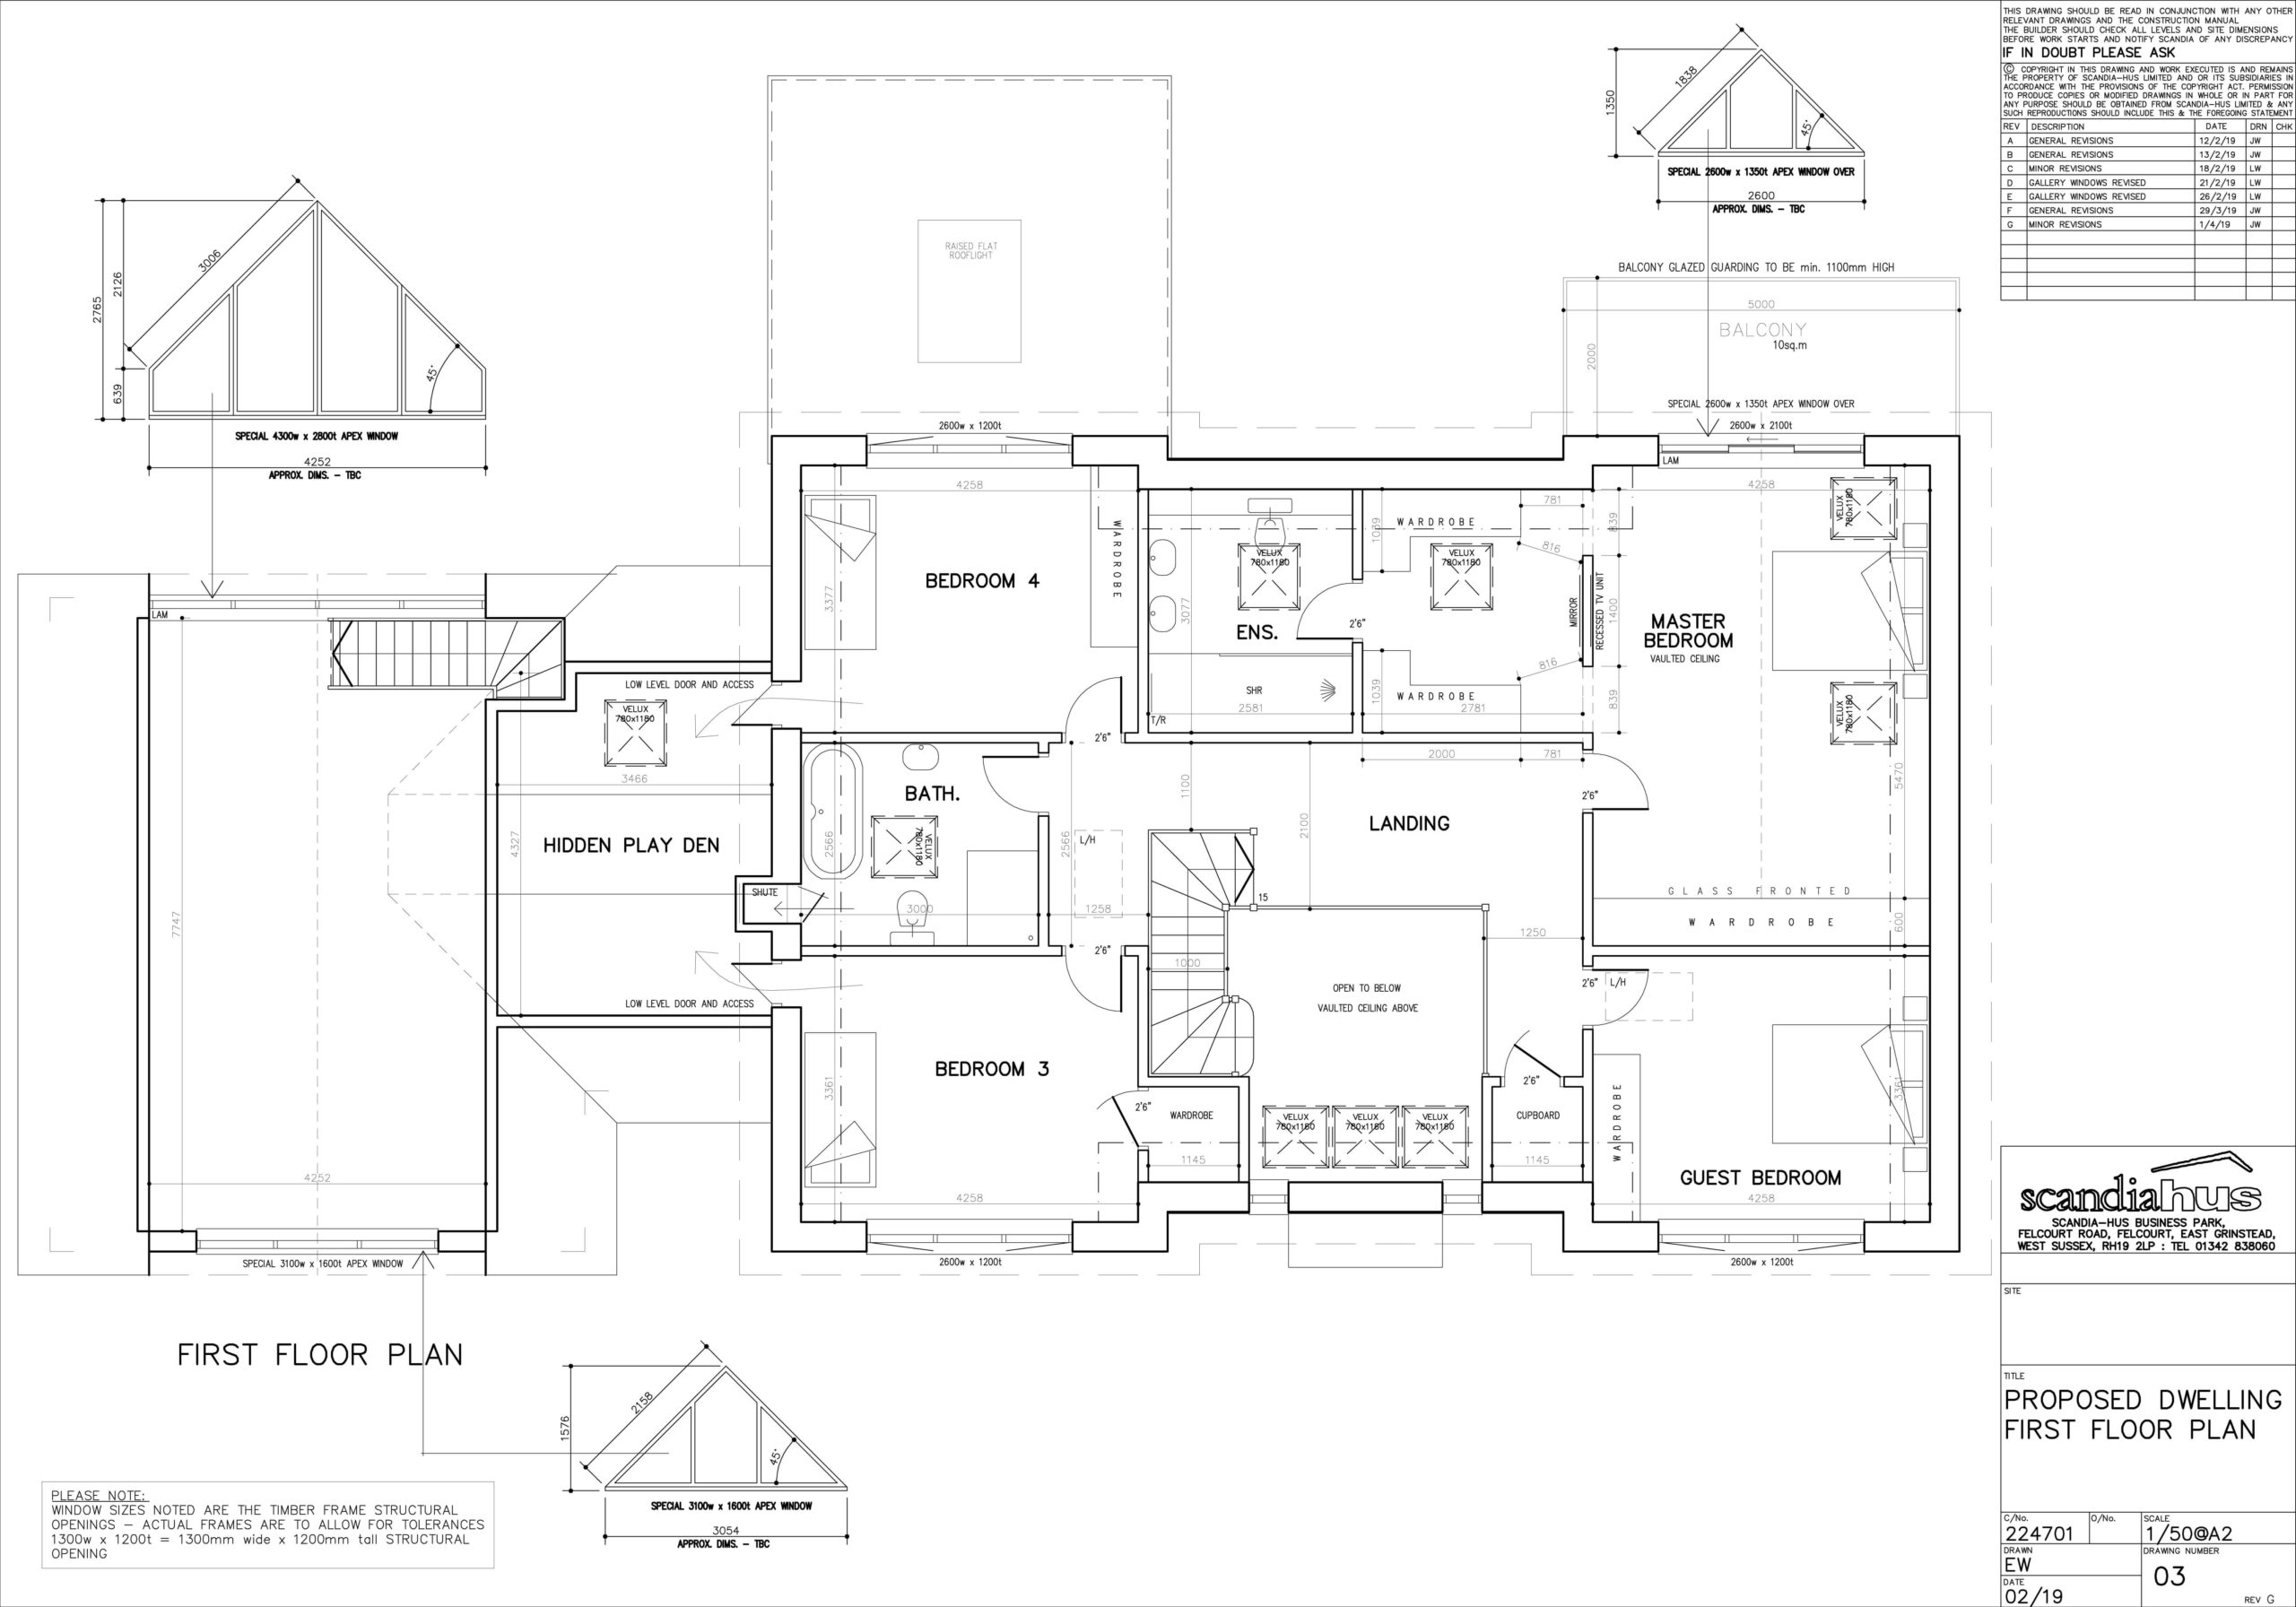 First floor plans of Scandia Hus new build to help plan air conditioning with SubCool FM